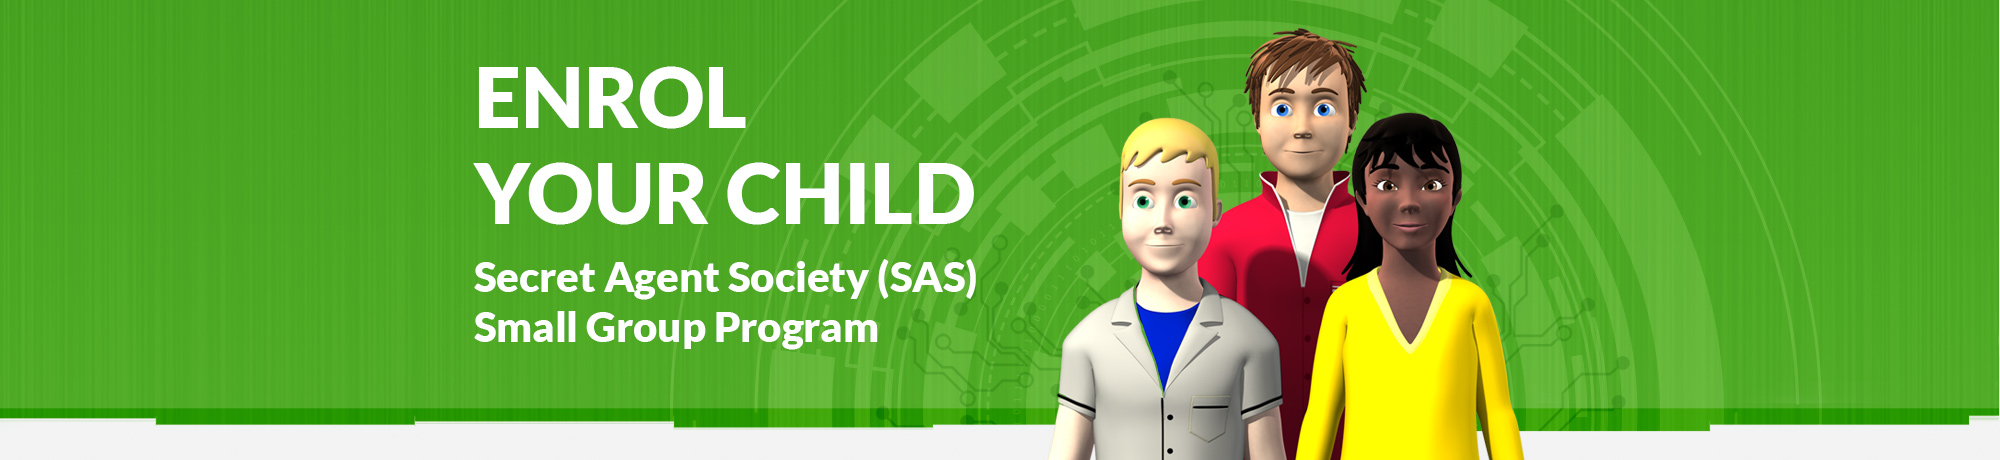 How to enroll your child in SAS